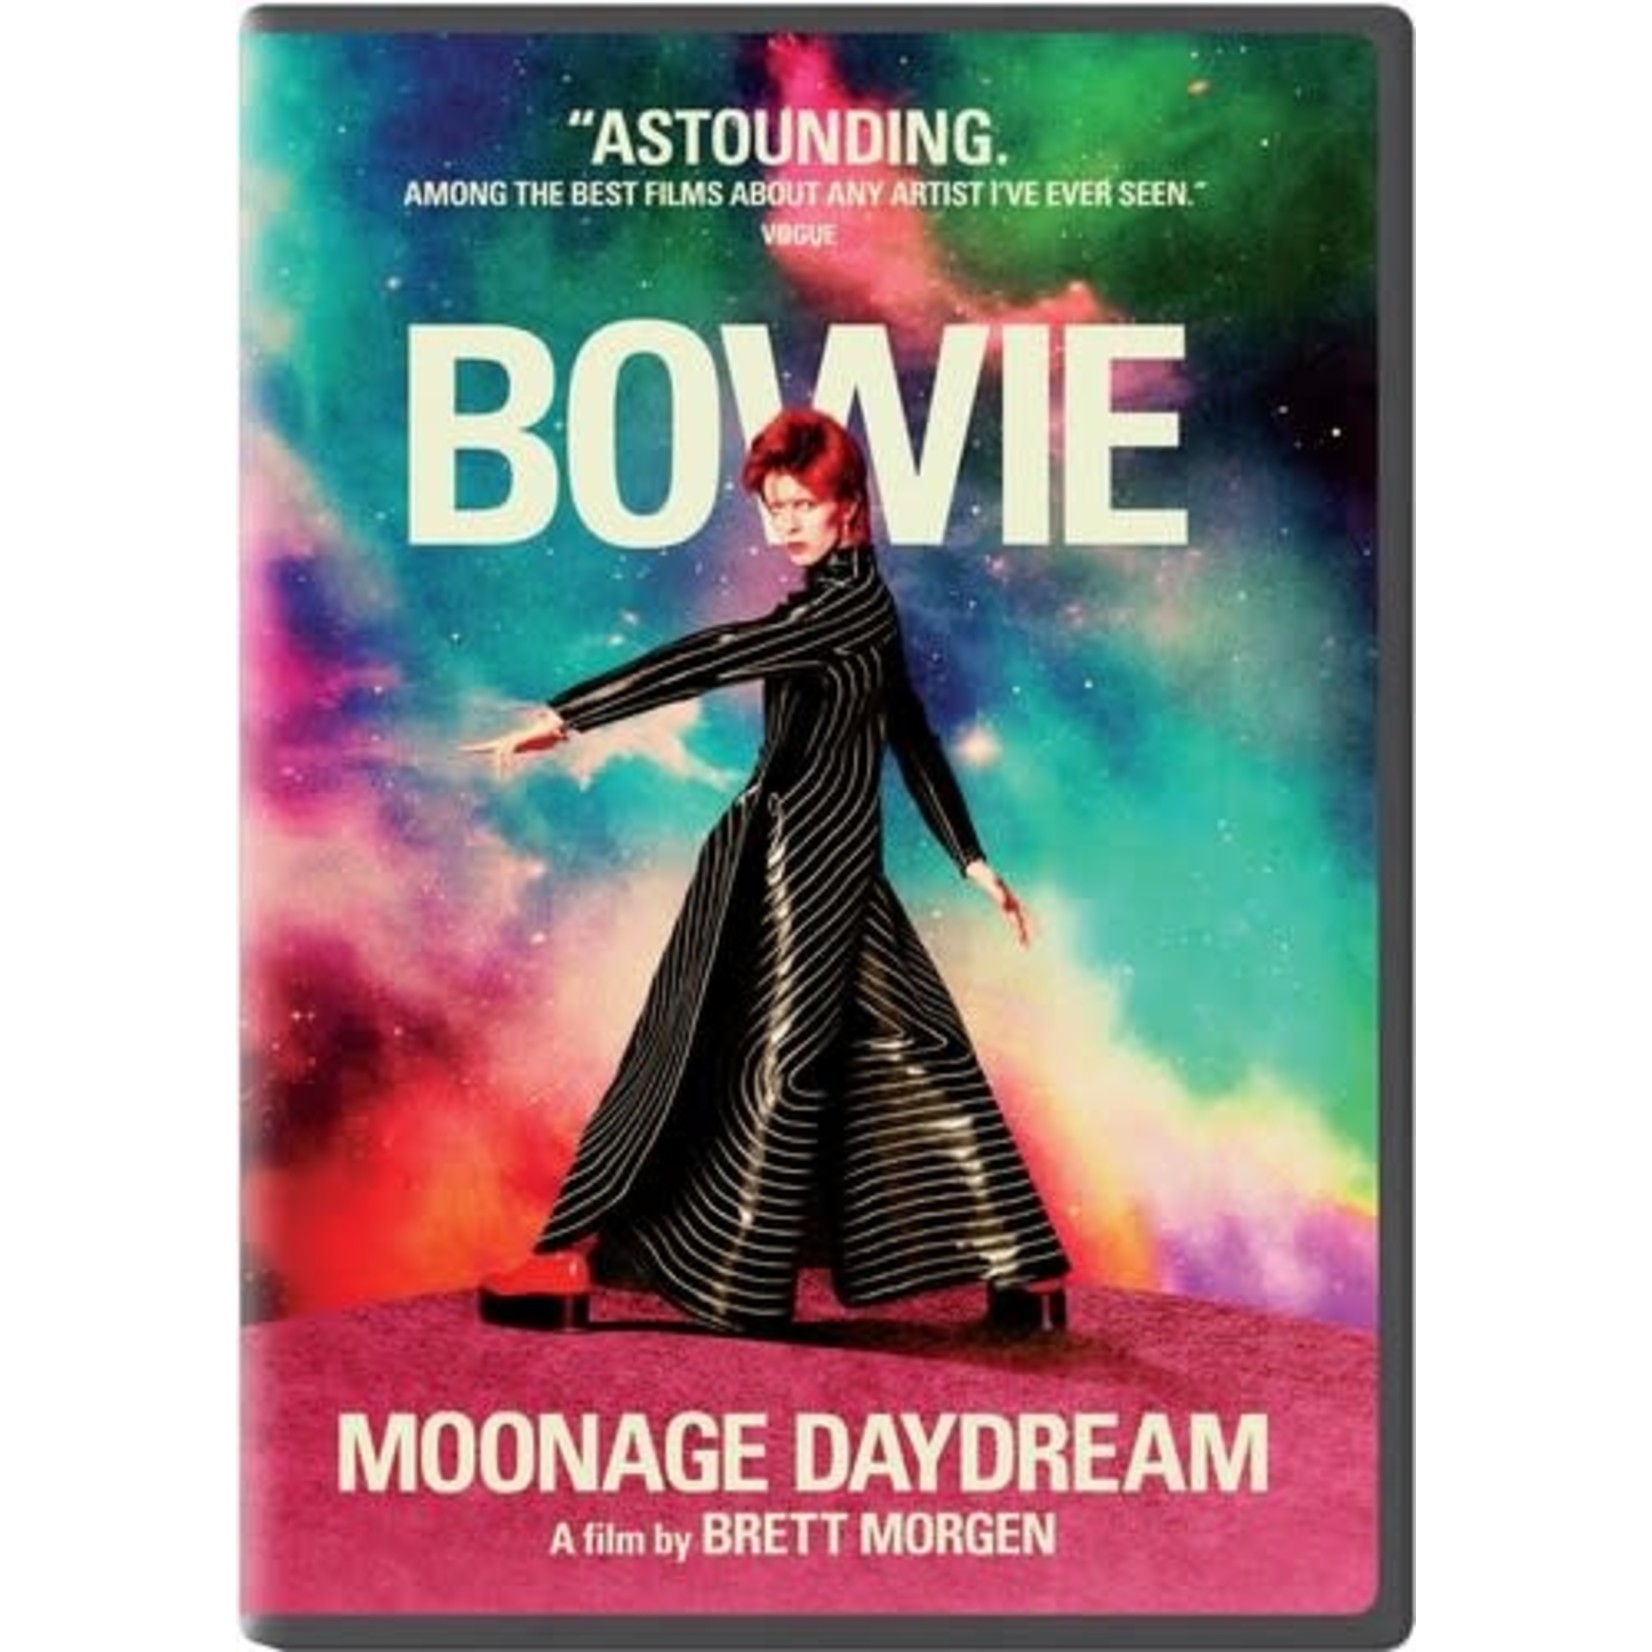 David Bowie - Moonage Daydream [USED DVD]